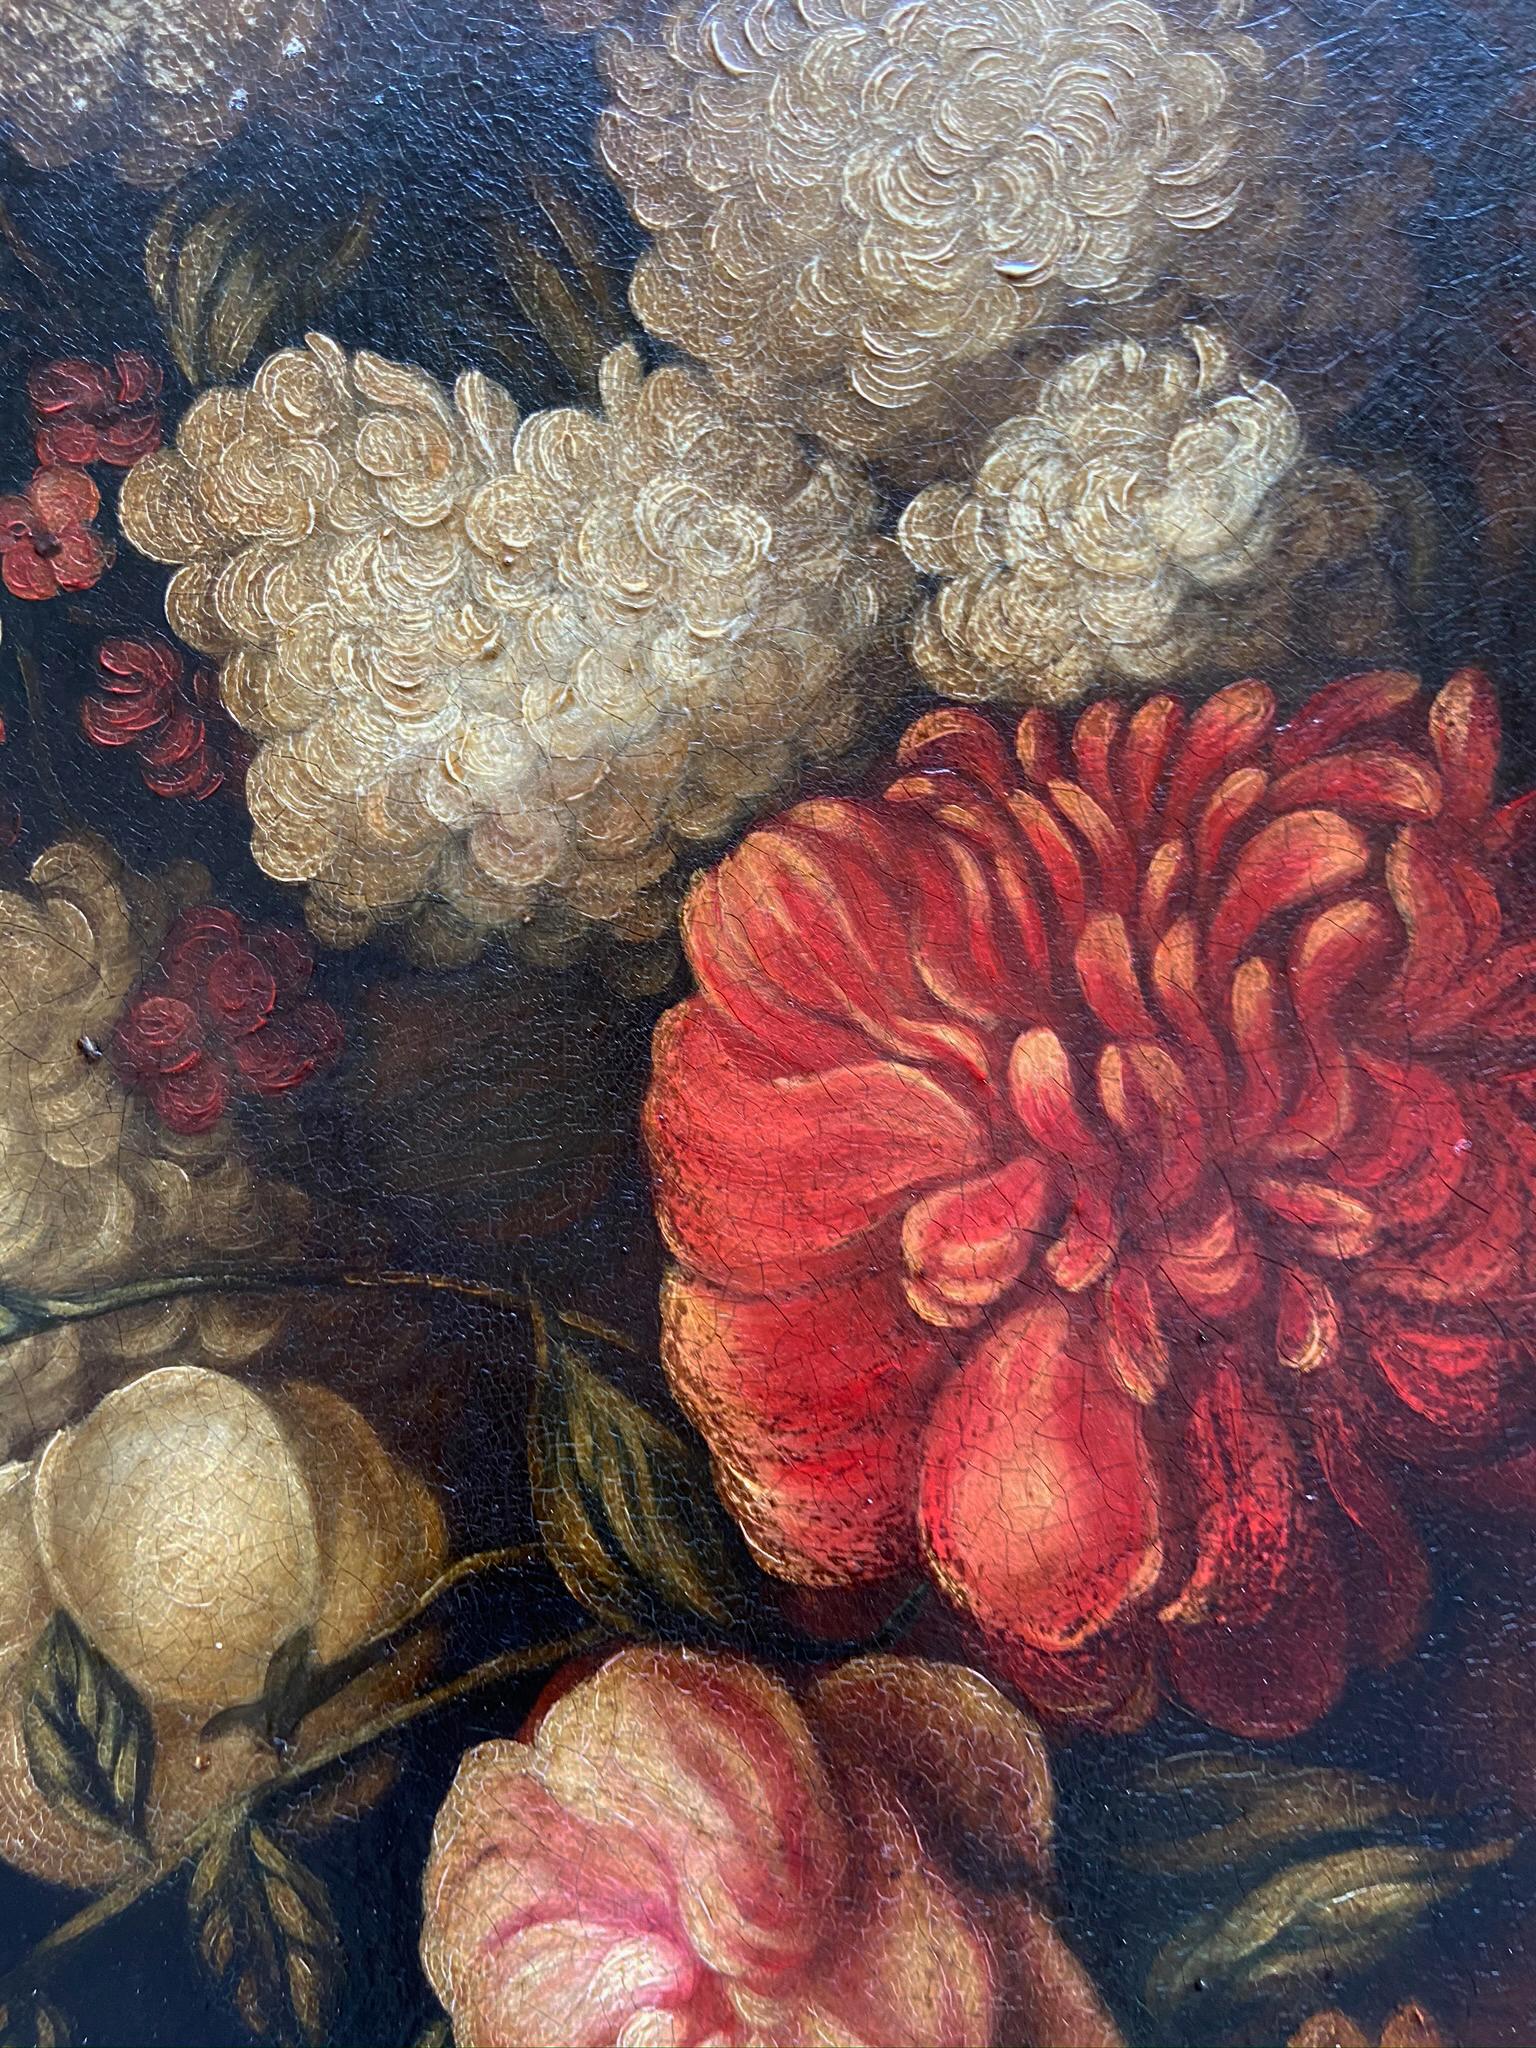 Flowers - Oil on canvas cm.70x90, Luigi Degli Espositi, Italy, 2002
Gold leaf gilded wooden frame available on request